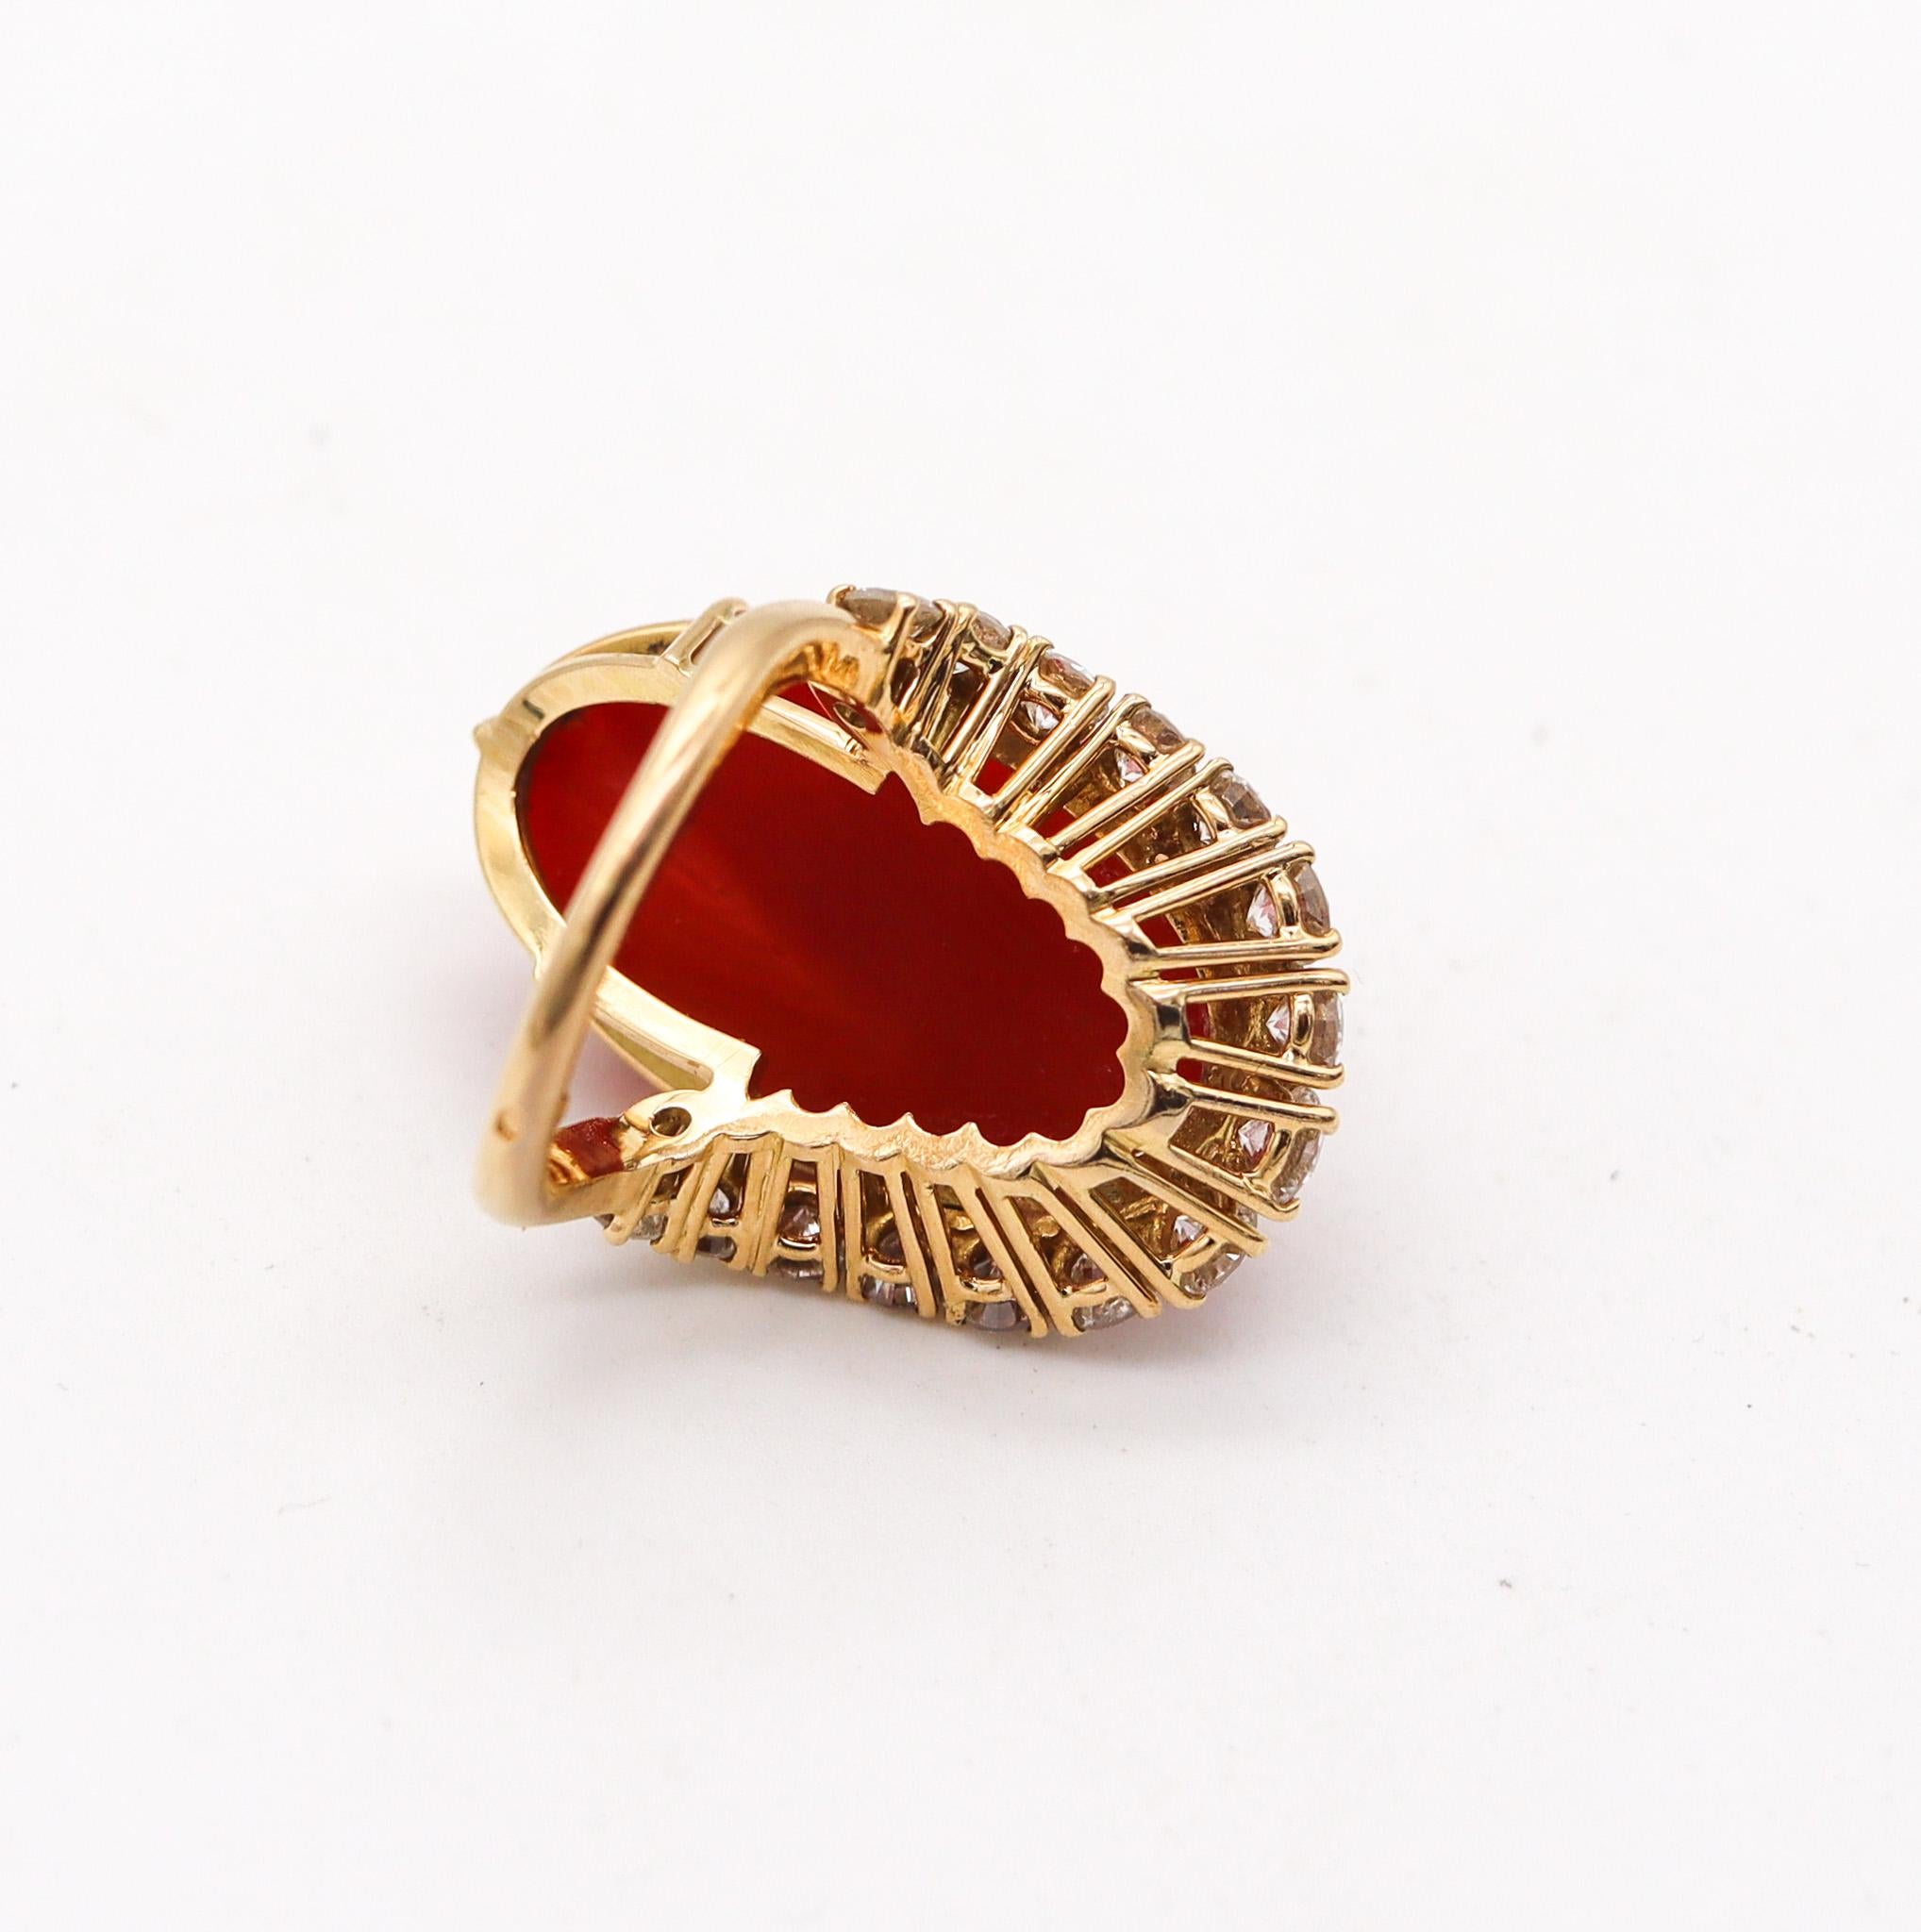 Boucheron Paris 1950 Modernist Ring In 18Kt Gold With 27.52 Ctw Diamonds & Coral In Excellent Condition For Sale In Miami, FL